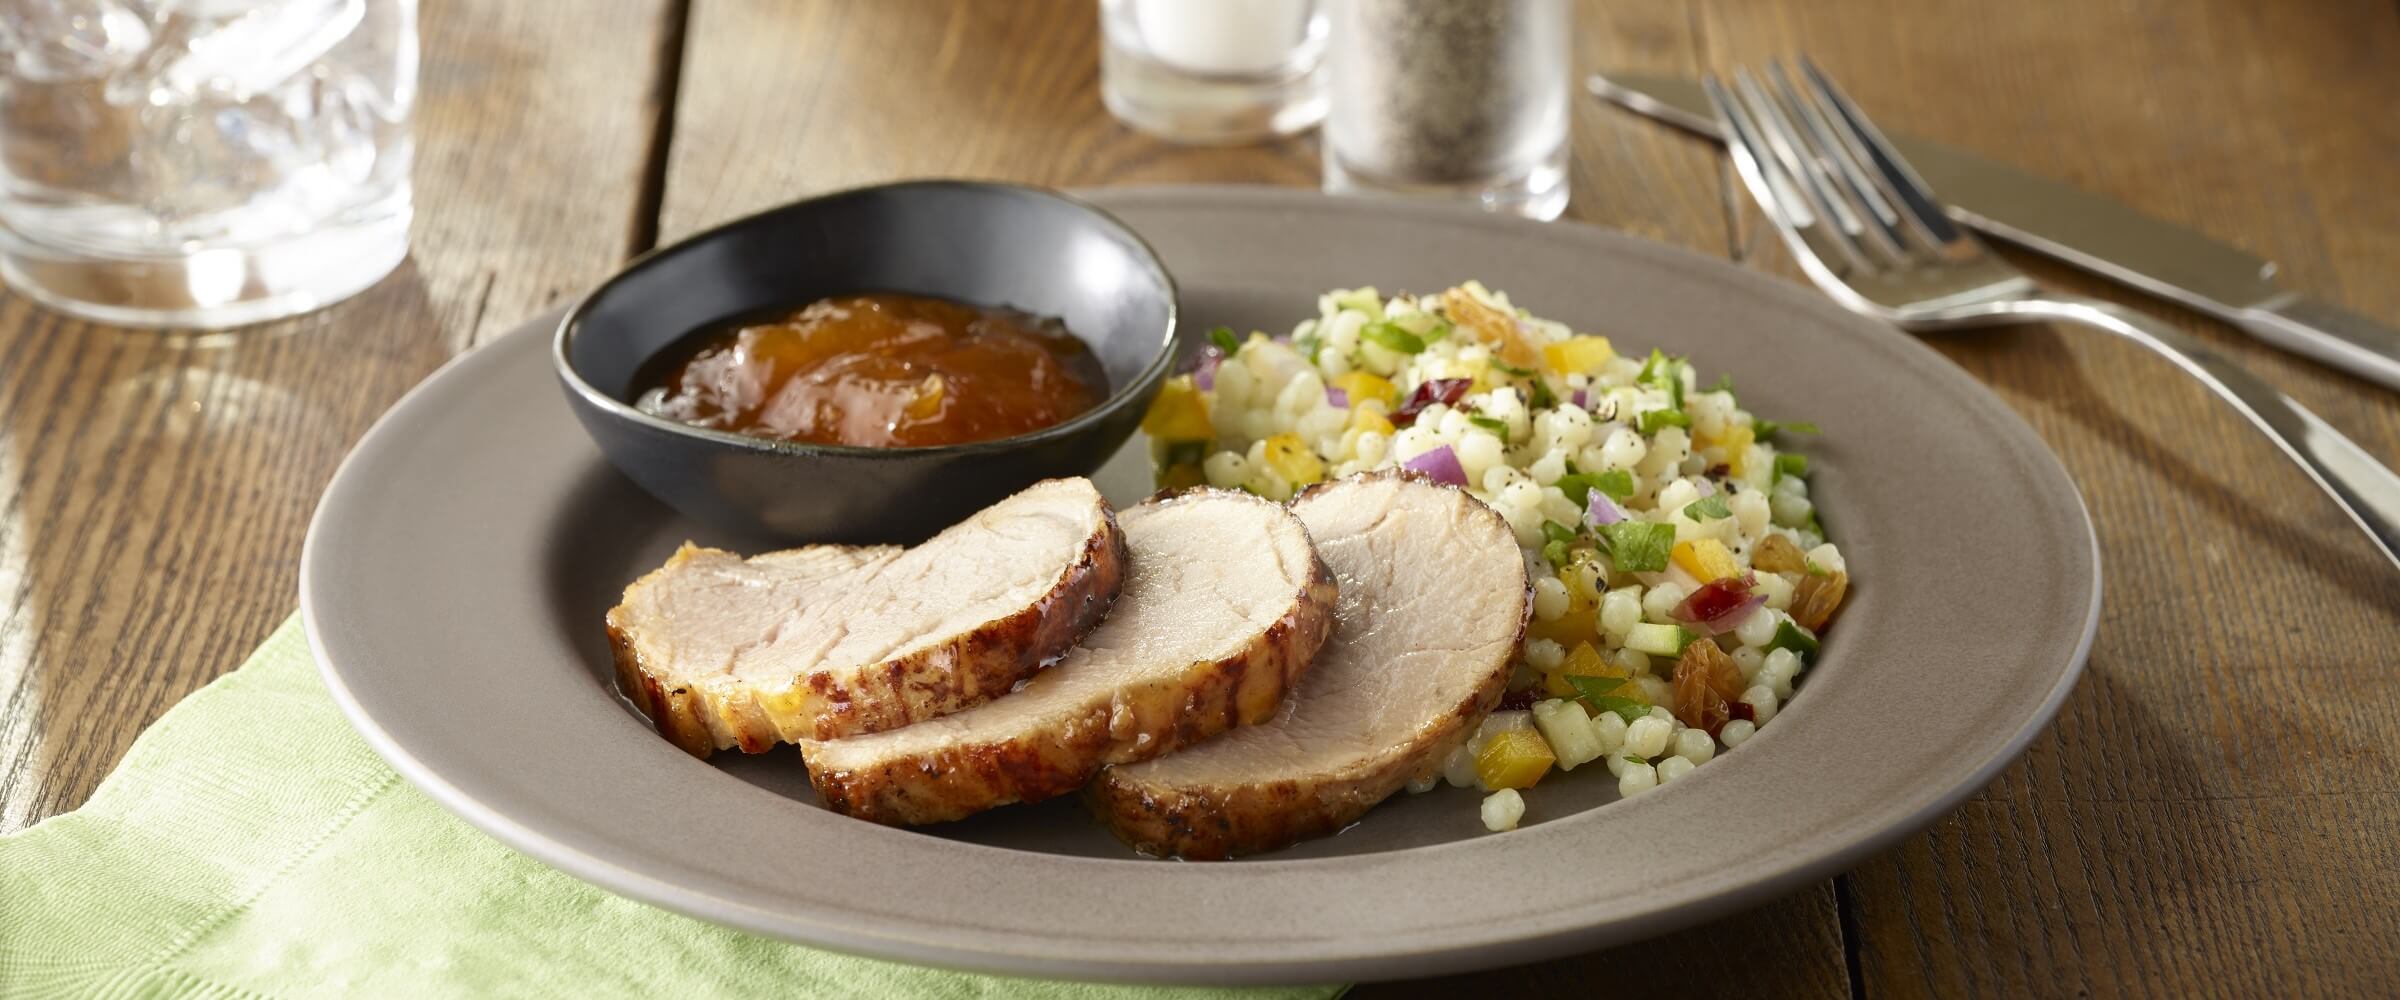 amazing apricot pork tenderloin with couscous and dipping sauce on tan plate